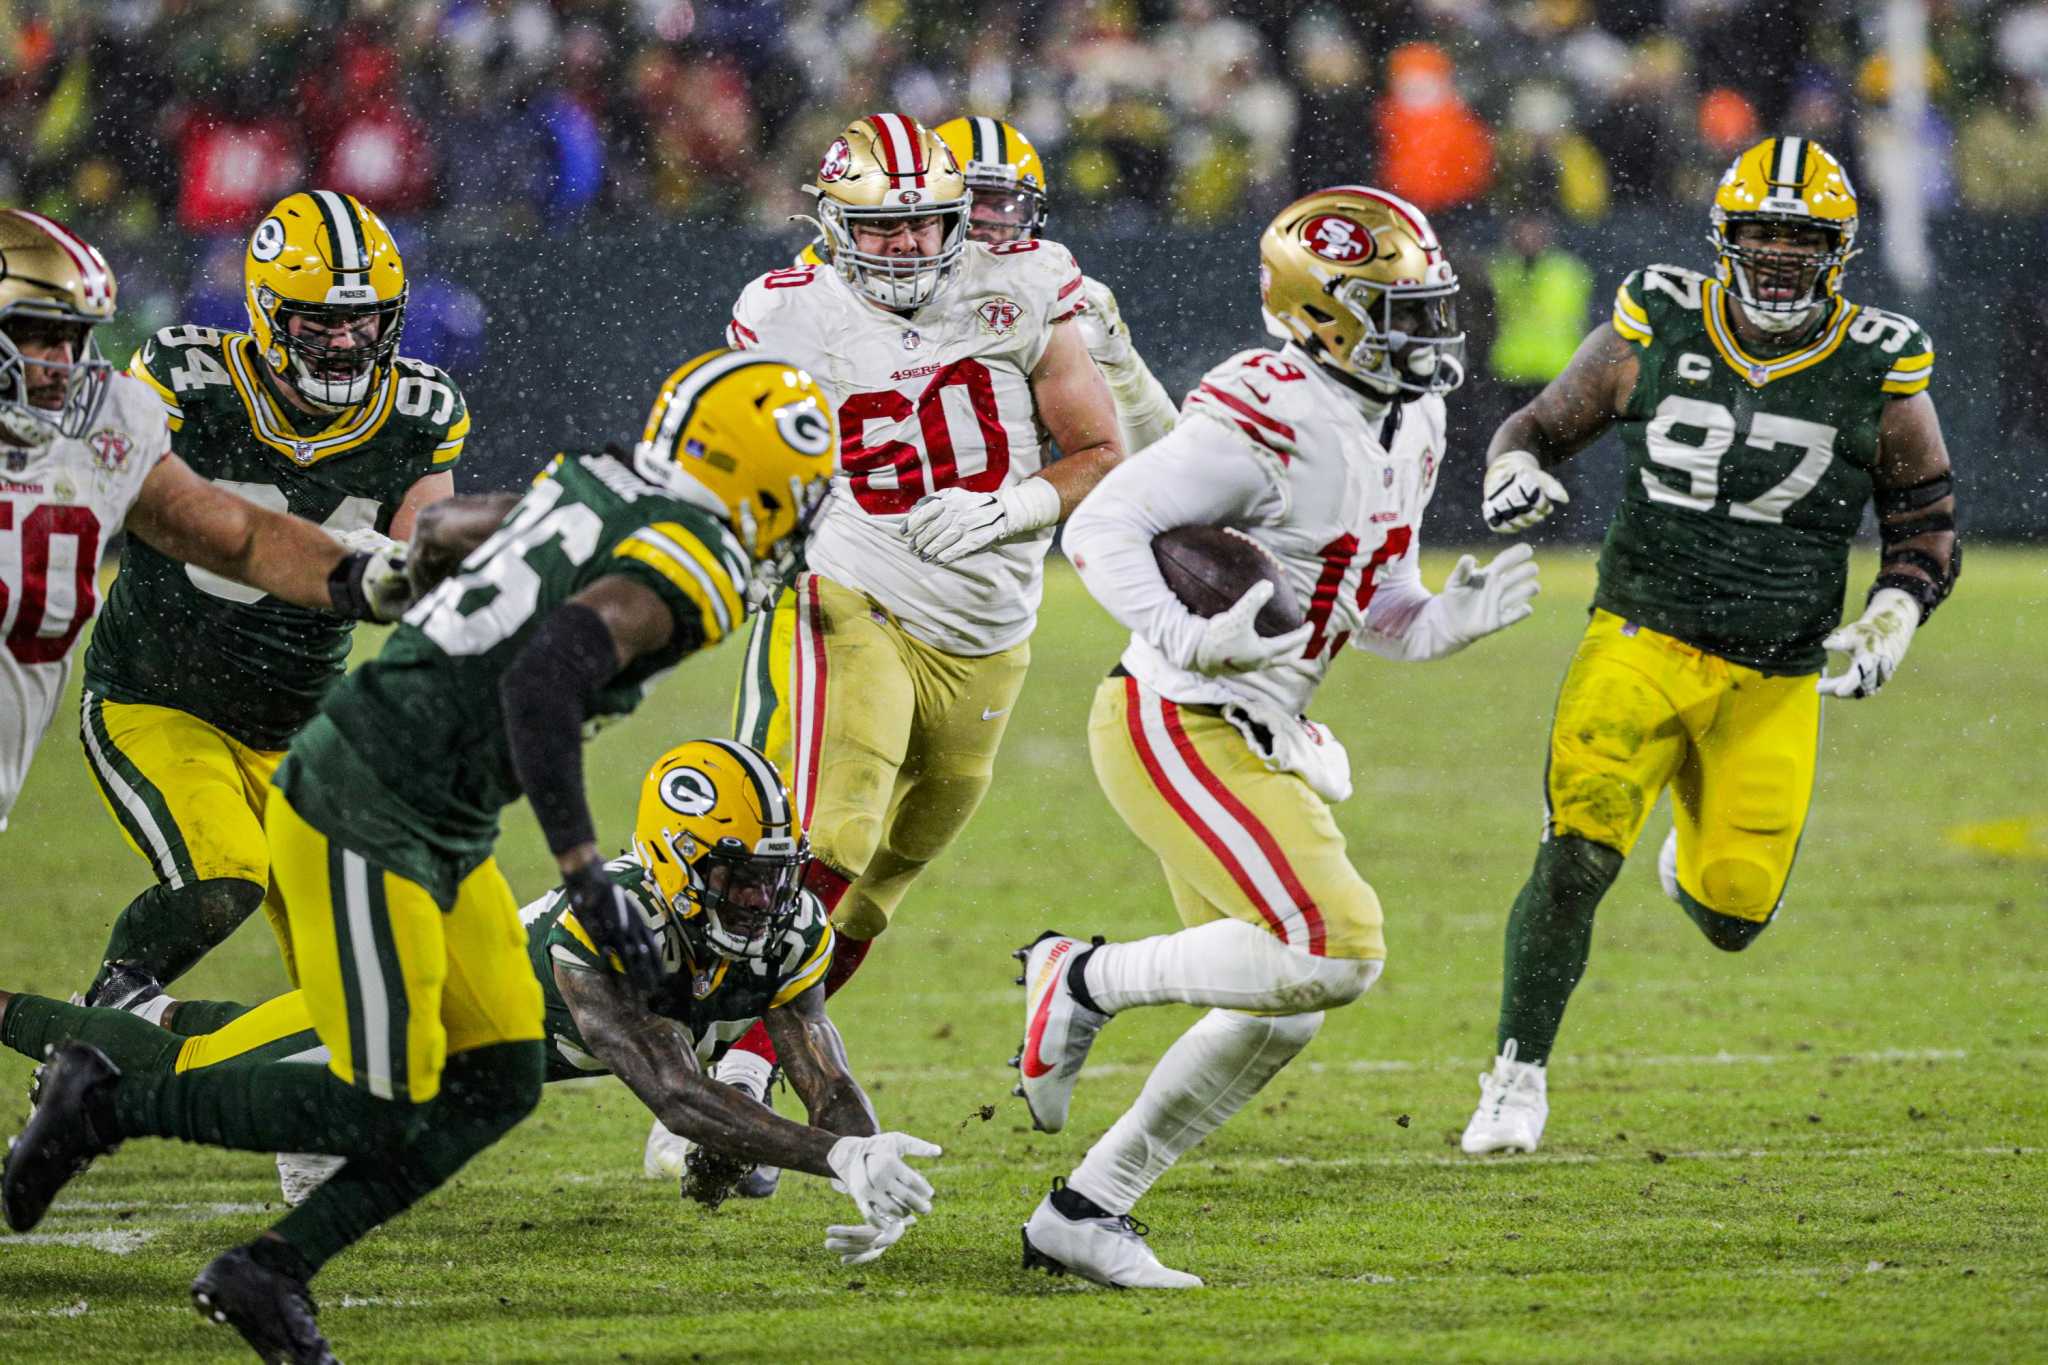 packers 49 ers